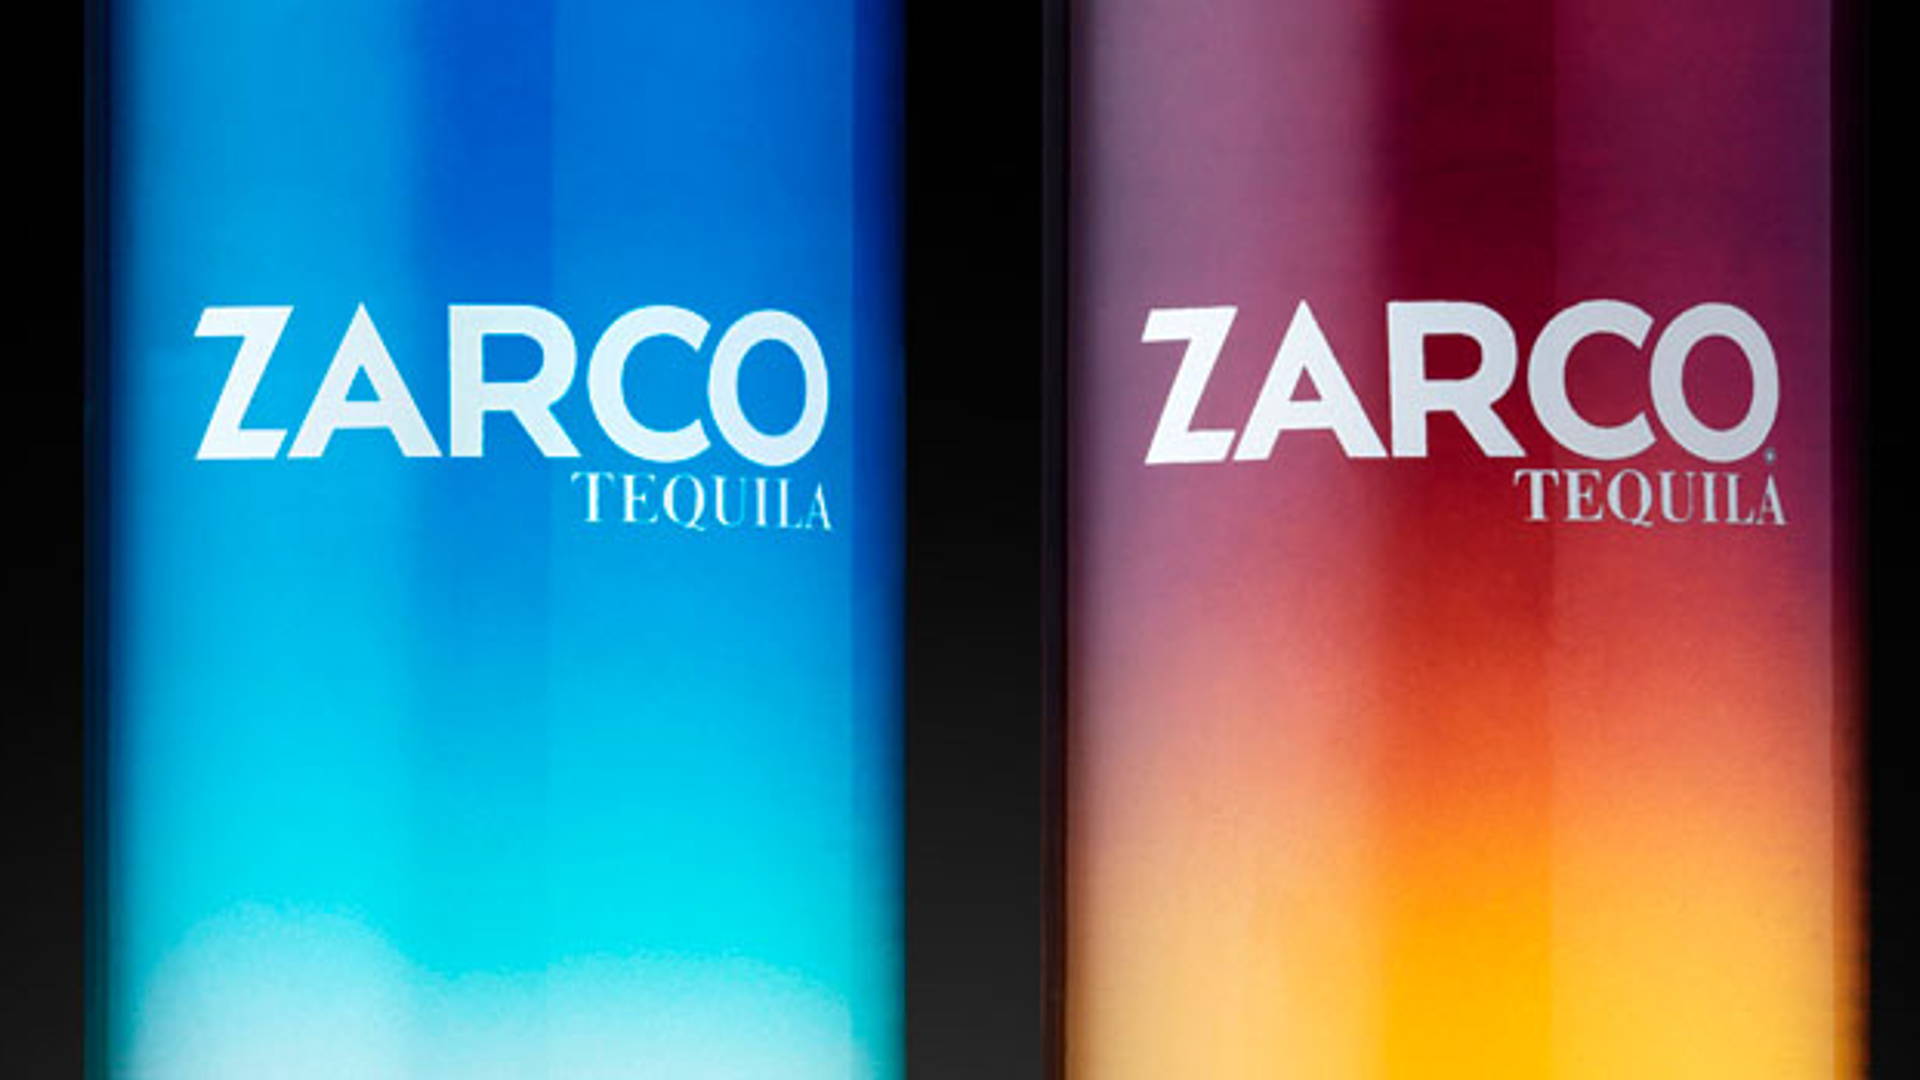 Featured image for Zarco Tequila